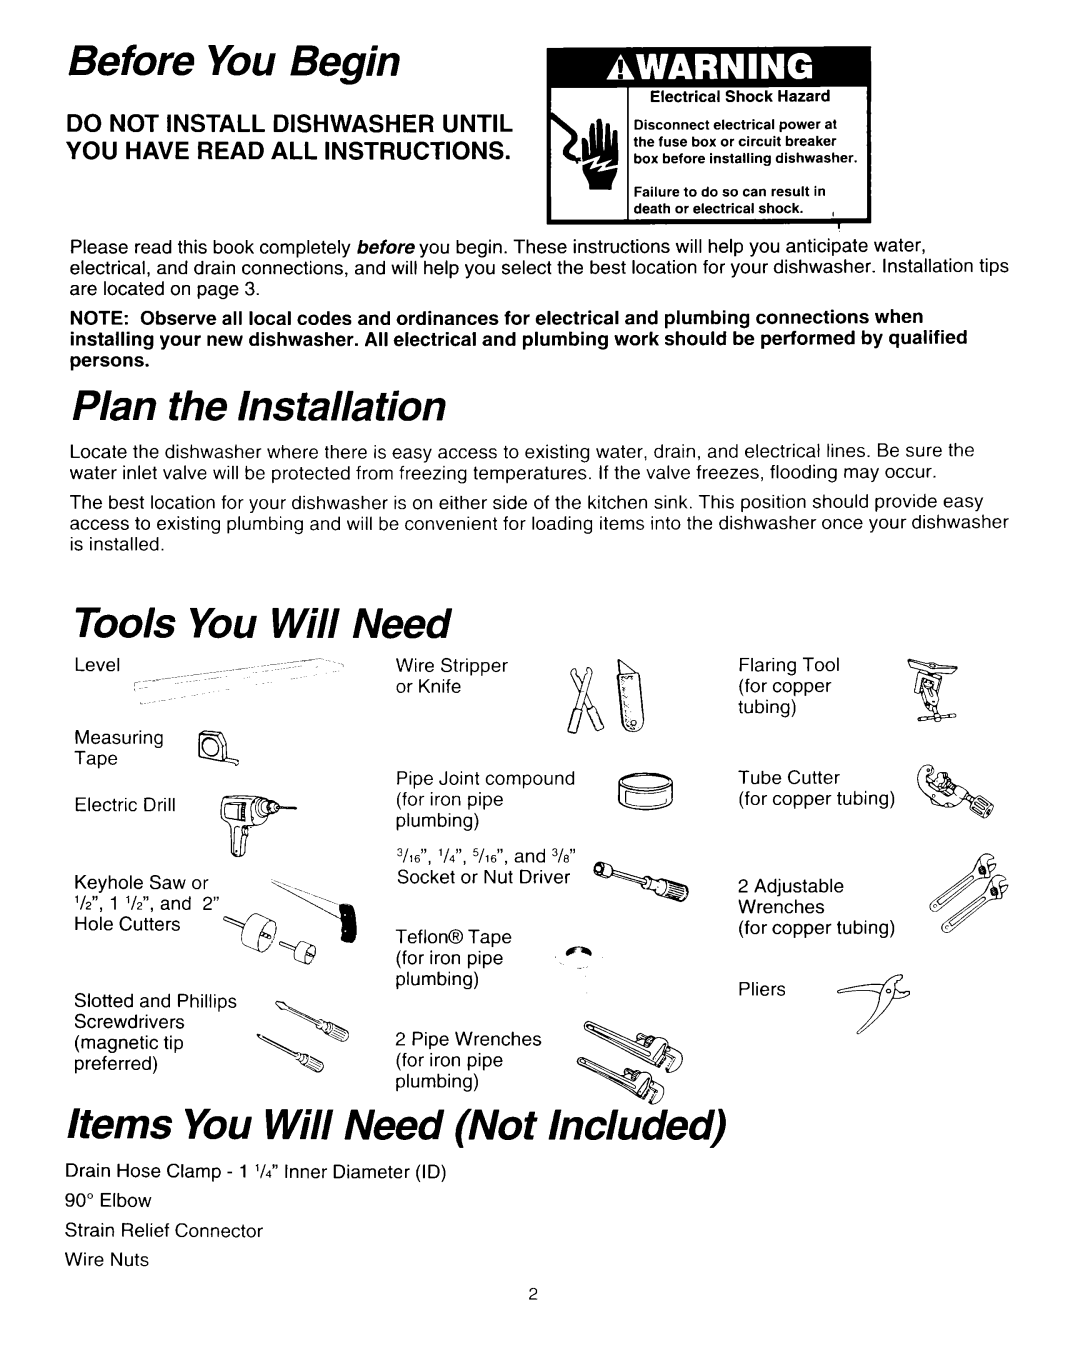 Whirlpool RUD0800EB Before You Begin, Plan the Installation, Tools, Items You Will Need Not Included 